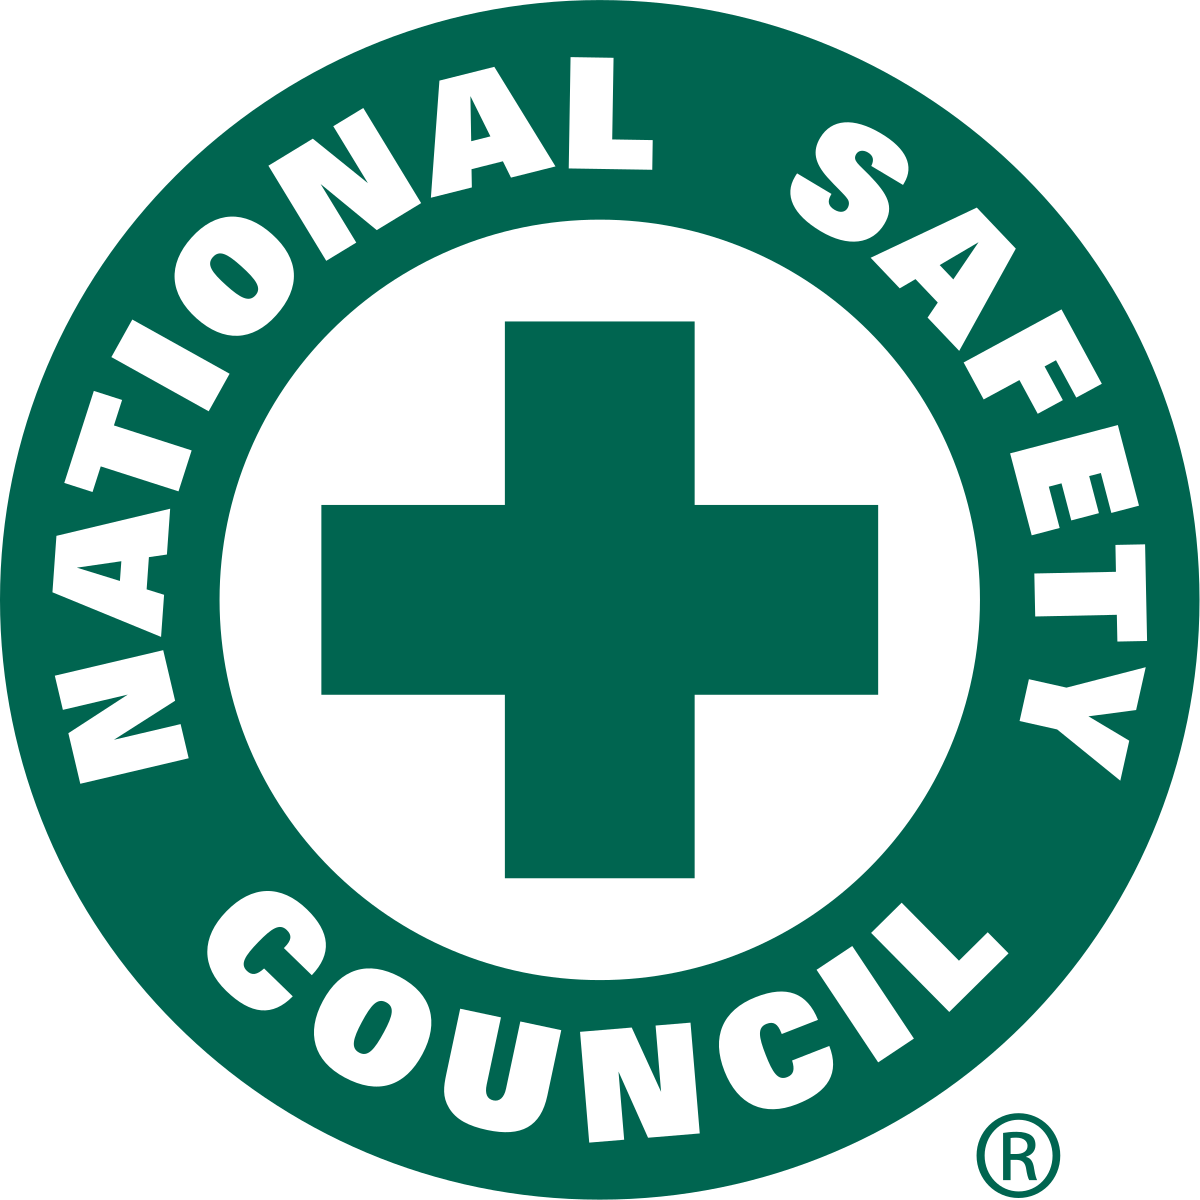 National_Safety_Council.svg